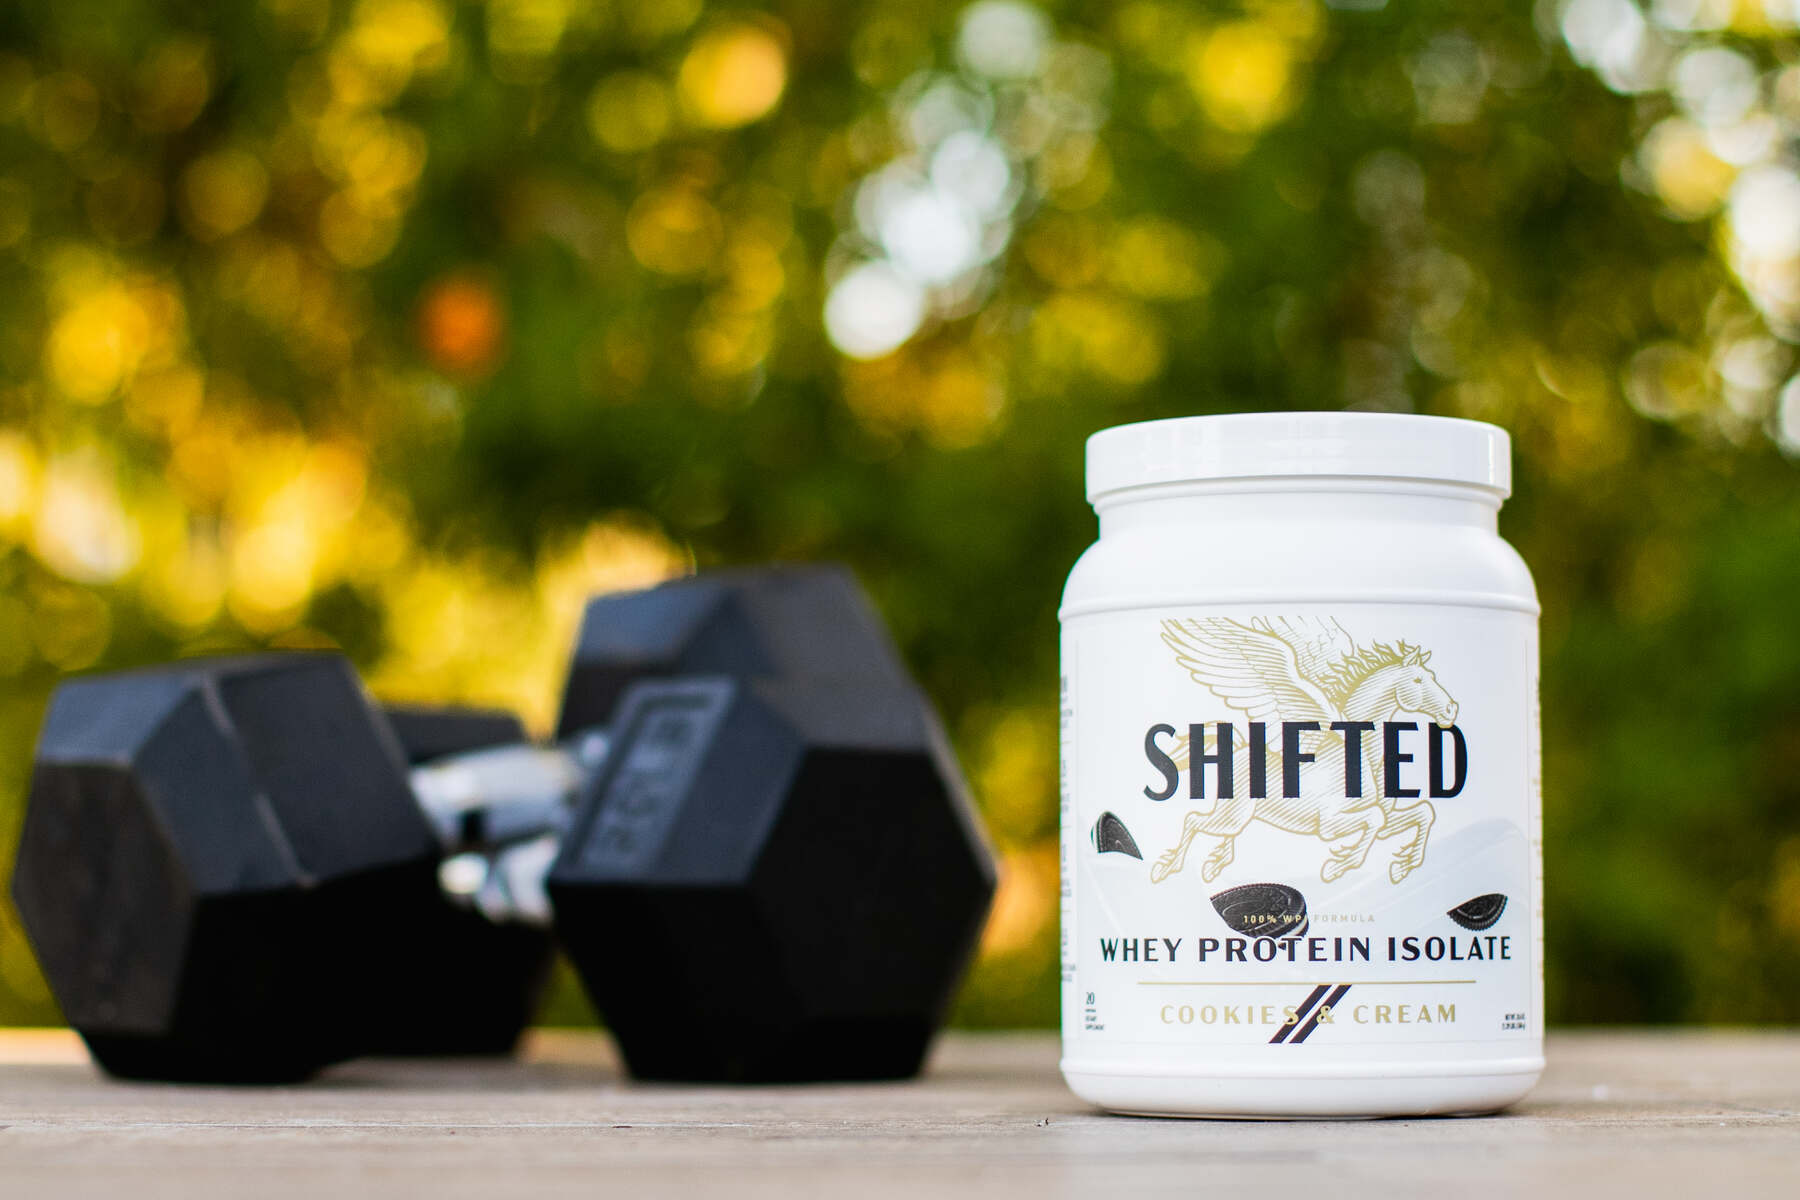 Shifted Whey Protein Isolate in Cookies and Cream flavor with dumbbells on the background